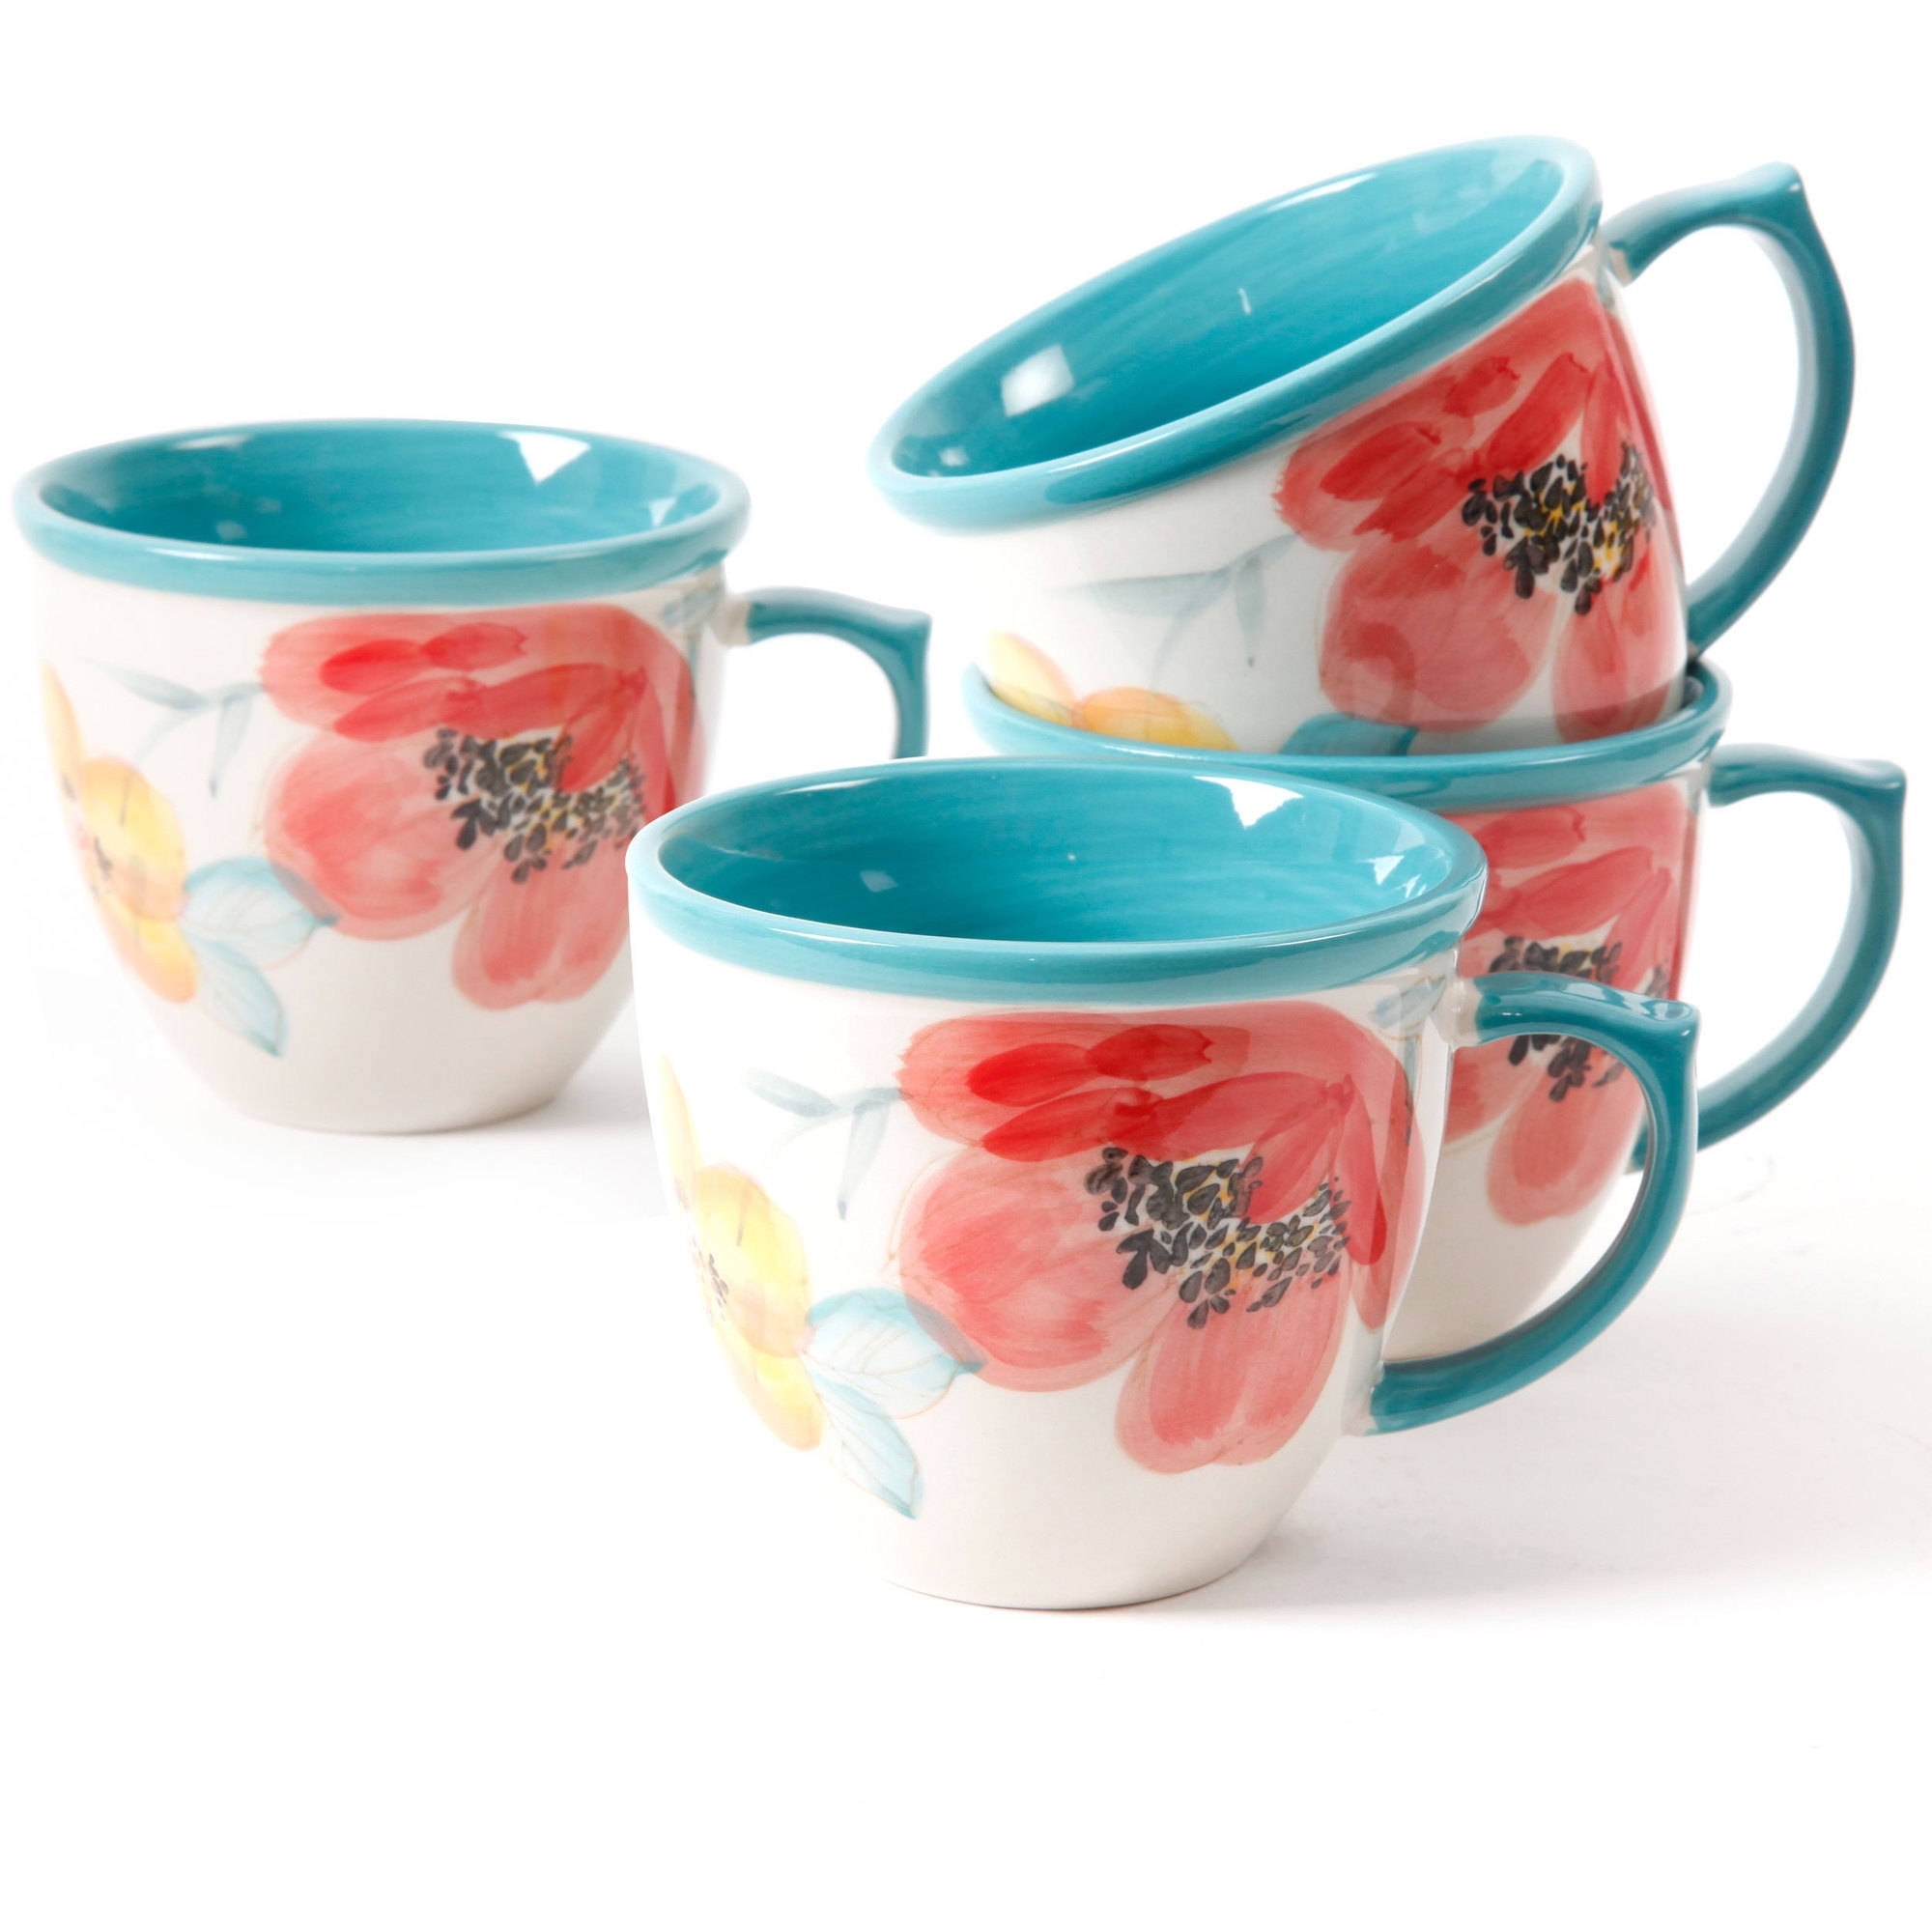 Set of 2▪︎THE PiONEER WOMAN▪︎Tall FLORAL Pedestal Coffee MUGS CupS GREEN  HANDLE